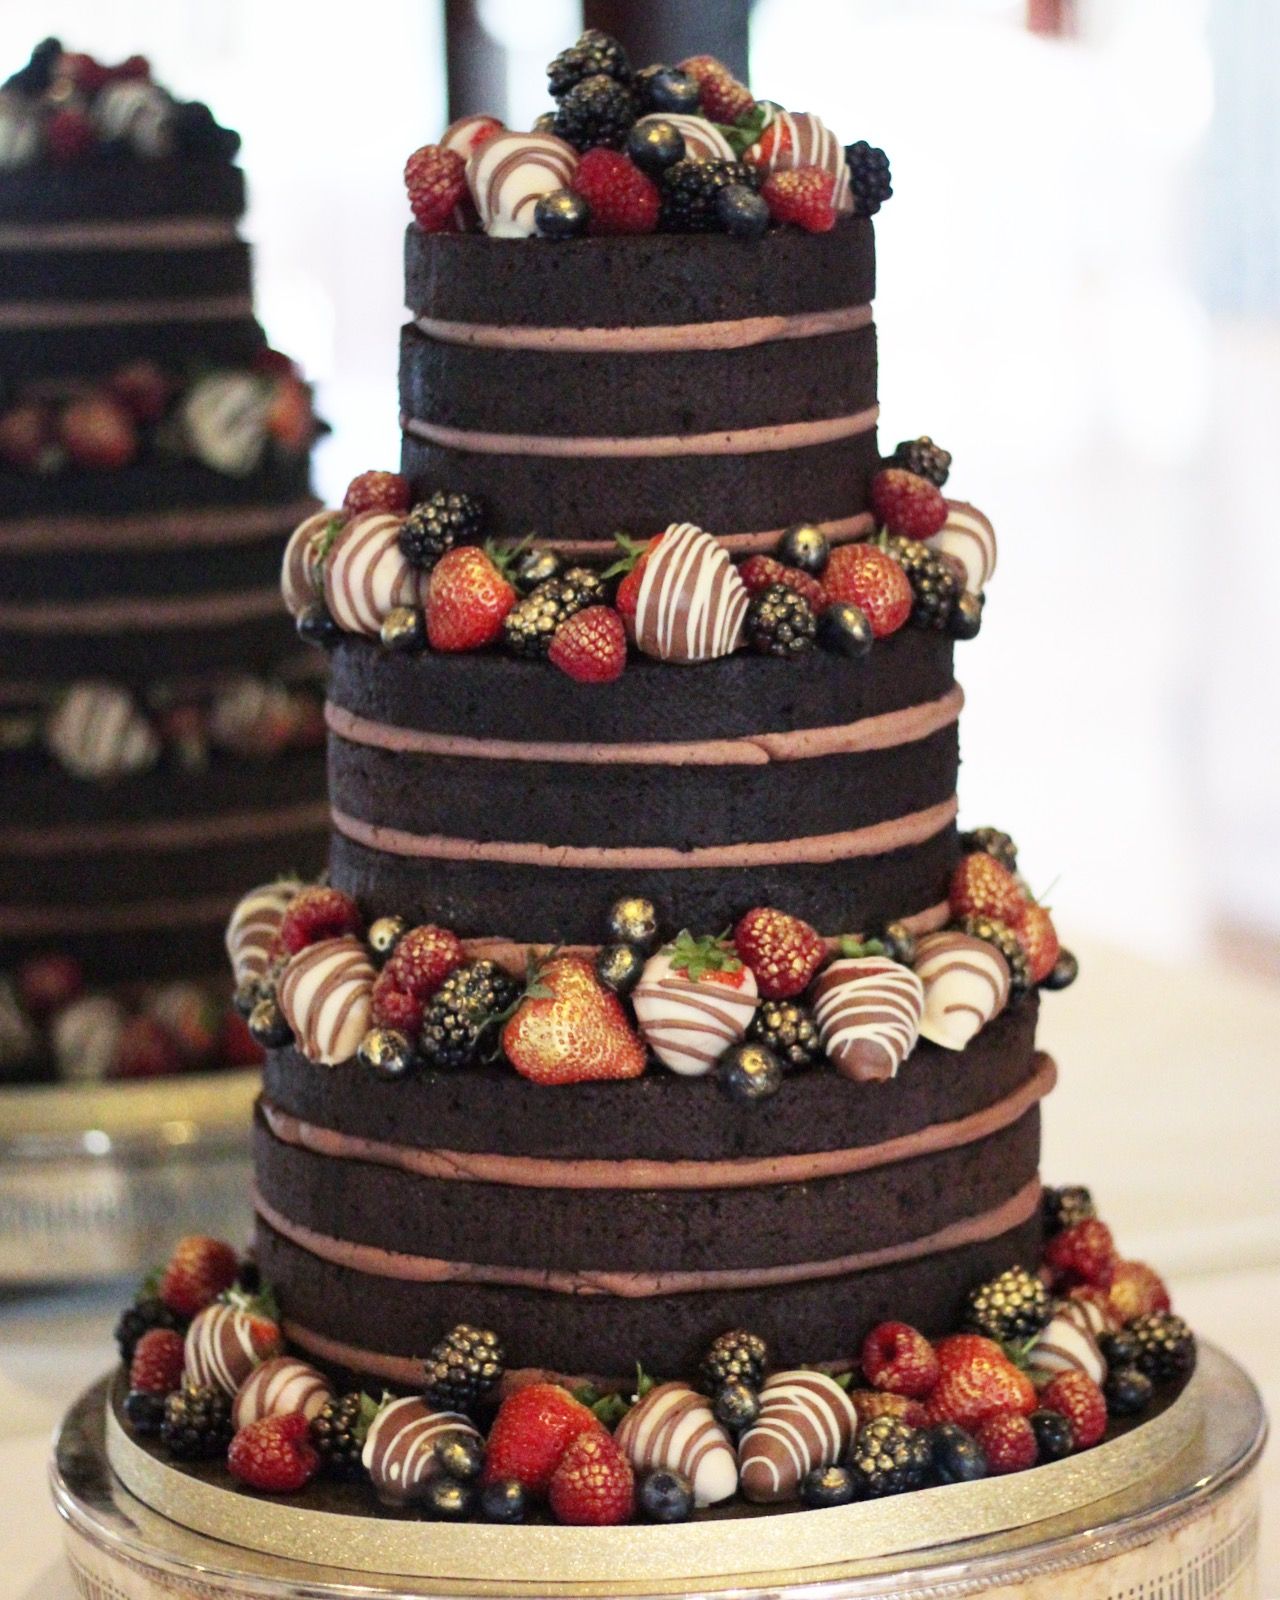 Chocolate wedding naked cake with chocolate and gold berries_ By sparkle Bakes